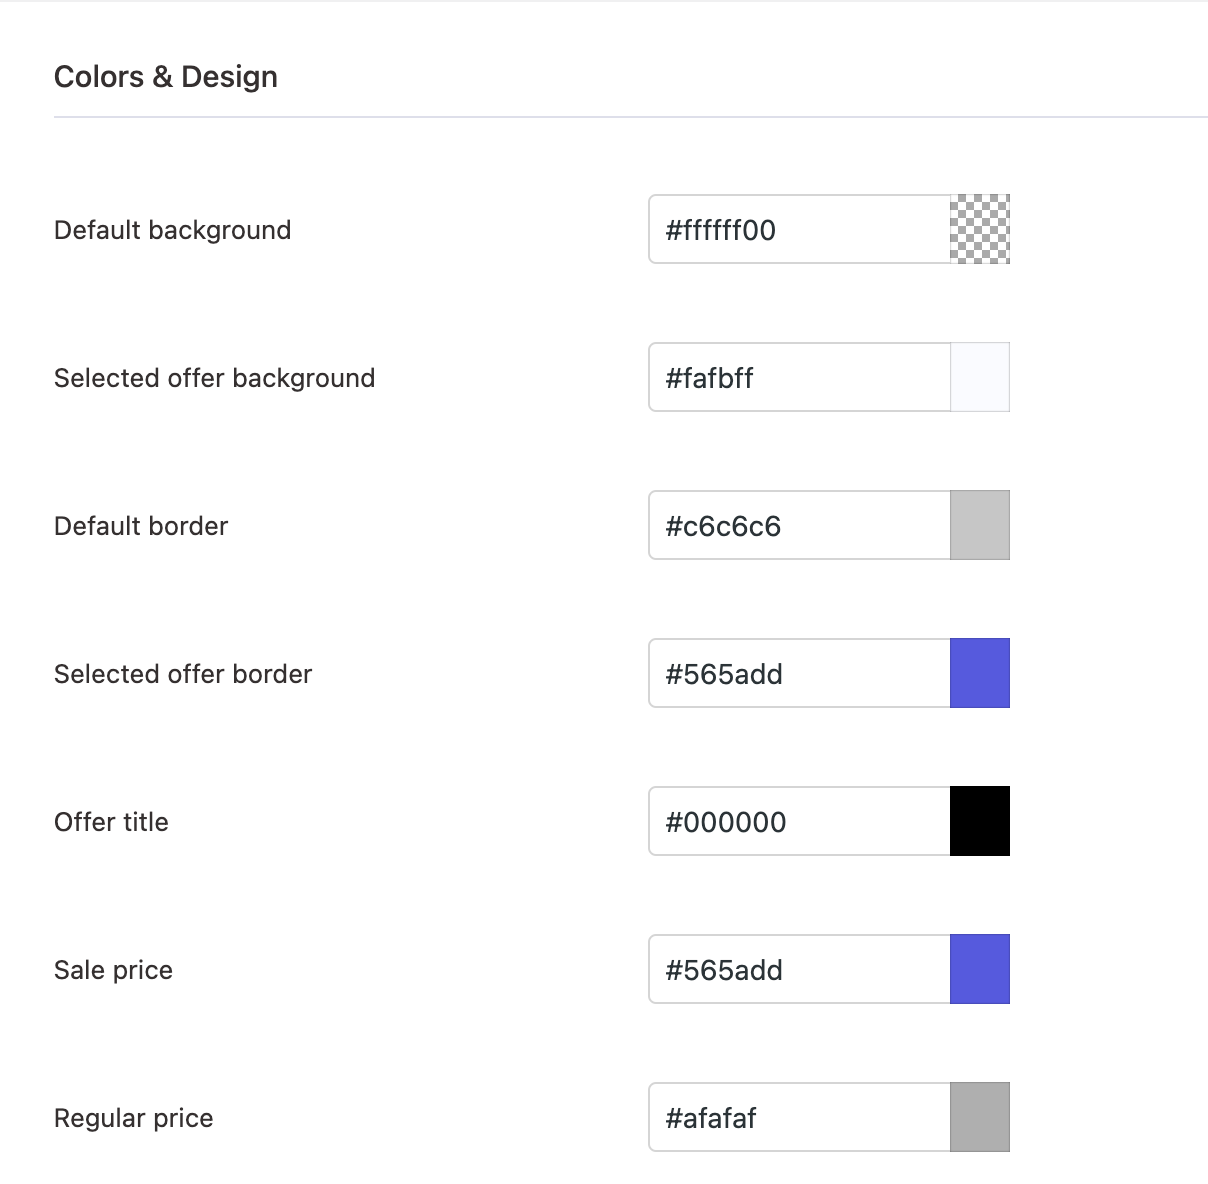 Showing the colors and design settings